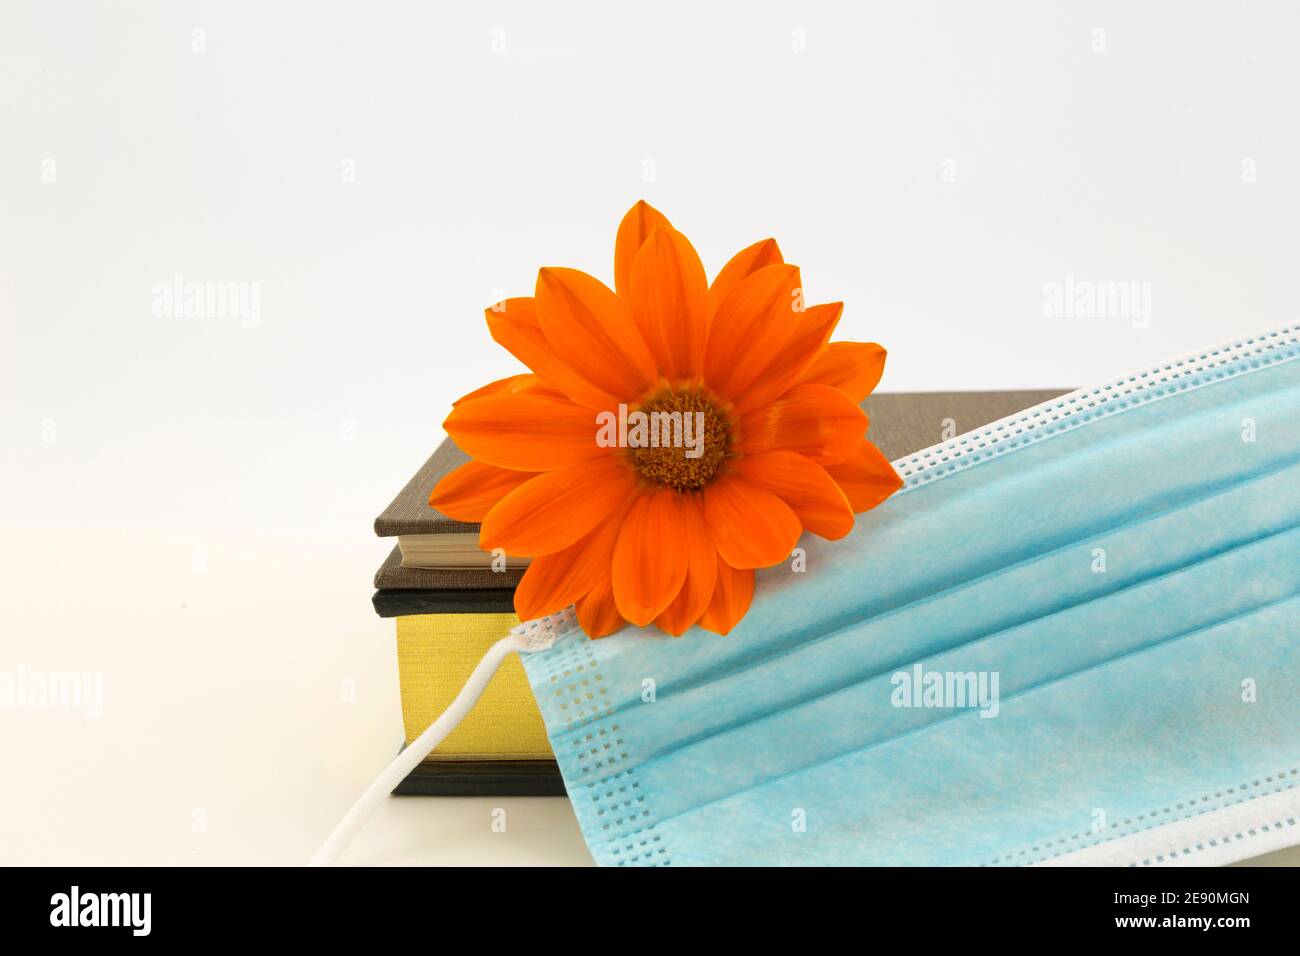 Data based prioriies in pandemic highlighted by blossom placed with protective face mask and reliable scientific information books Stock Photo